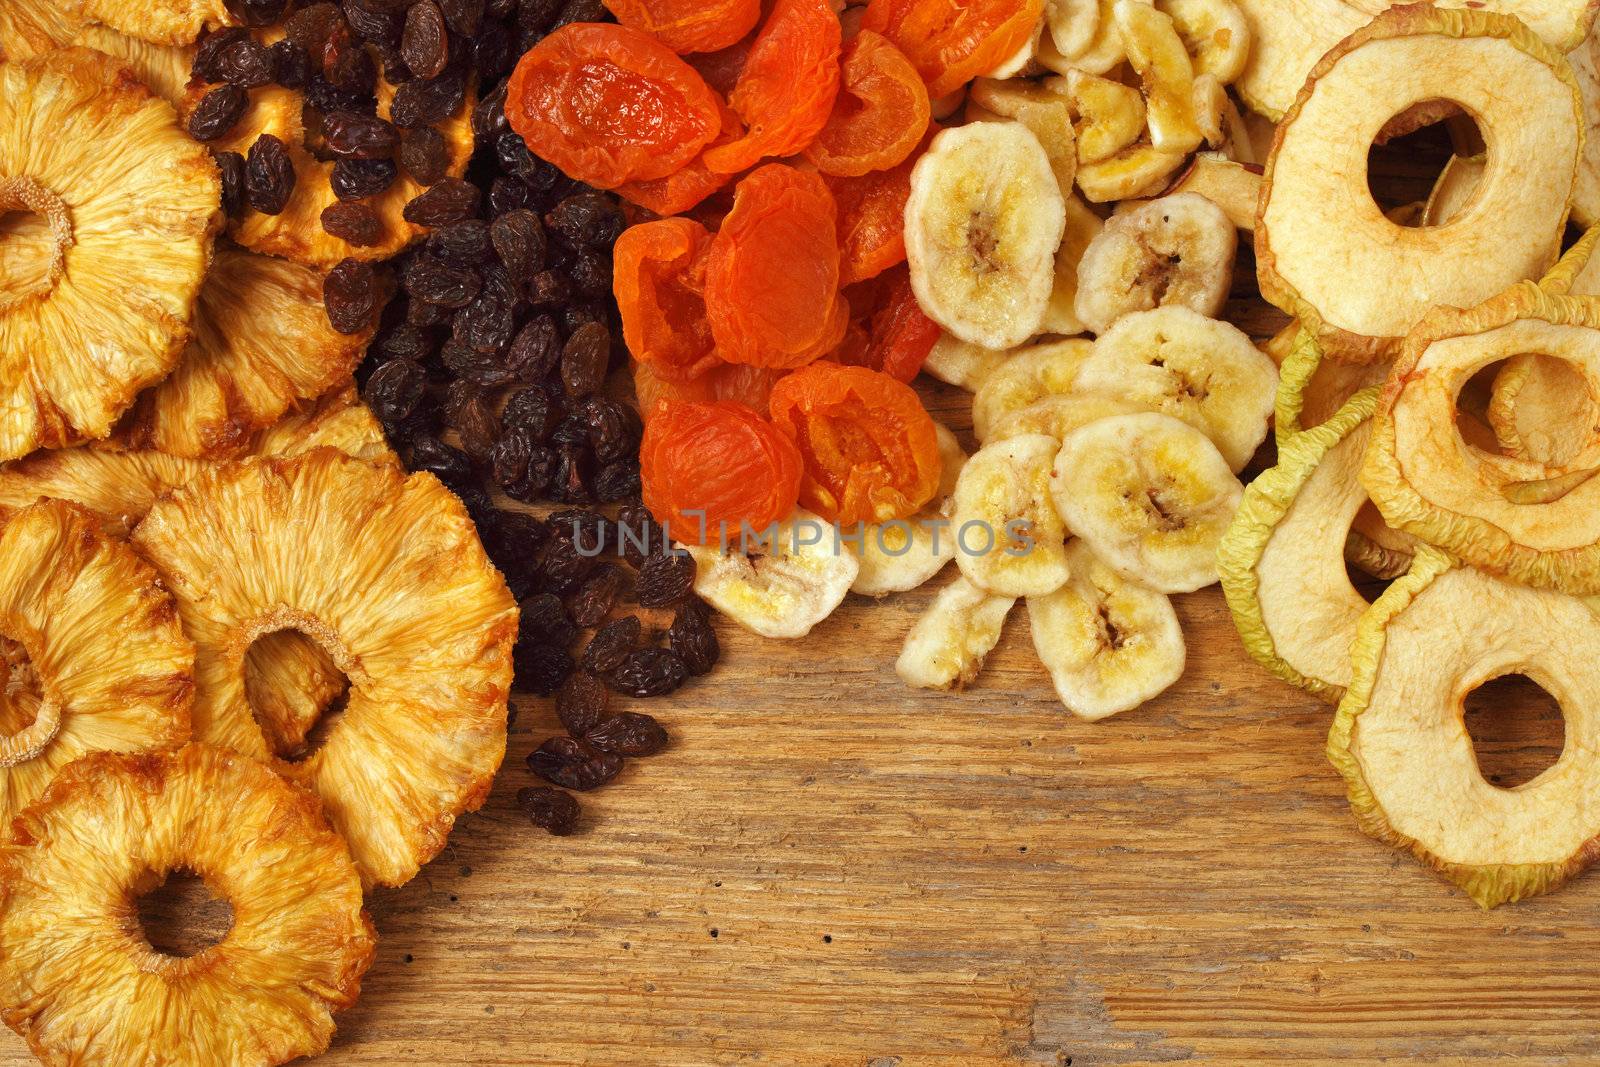 Various dried fruit displayed on an old wooden table - apple rings, pineapple rings, apricots, raisins, and banana slices.
